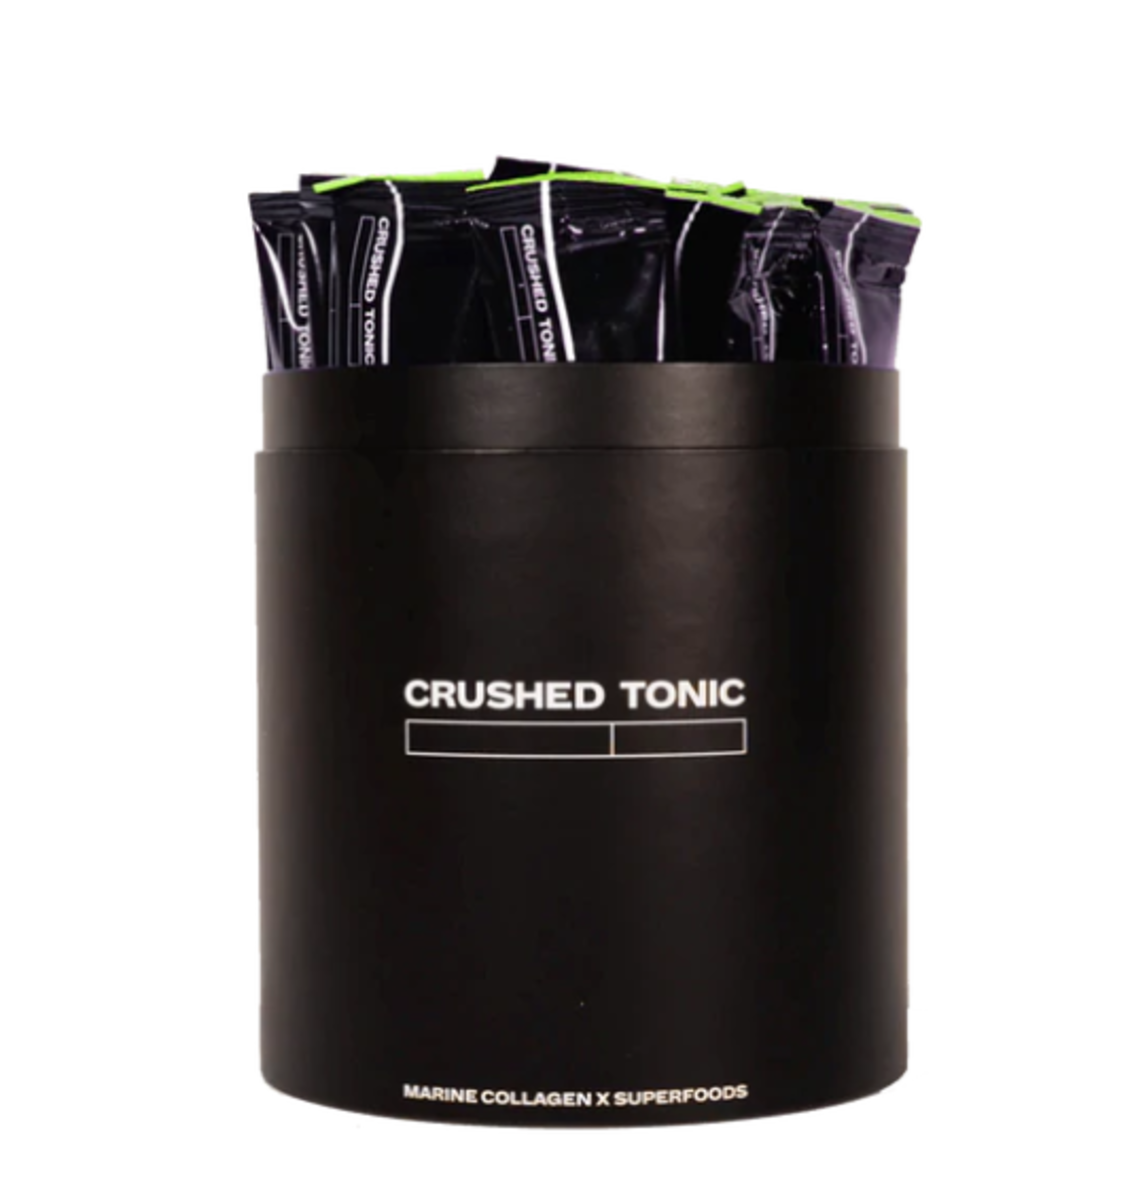 Crushed Tonic's marine collagen also comes in matcha flavor and contains biotin and probiotics, sold in Organic Authority's store. 